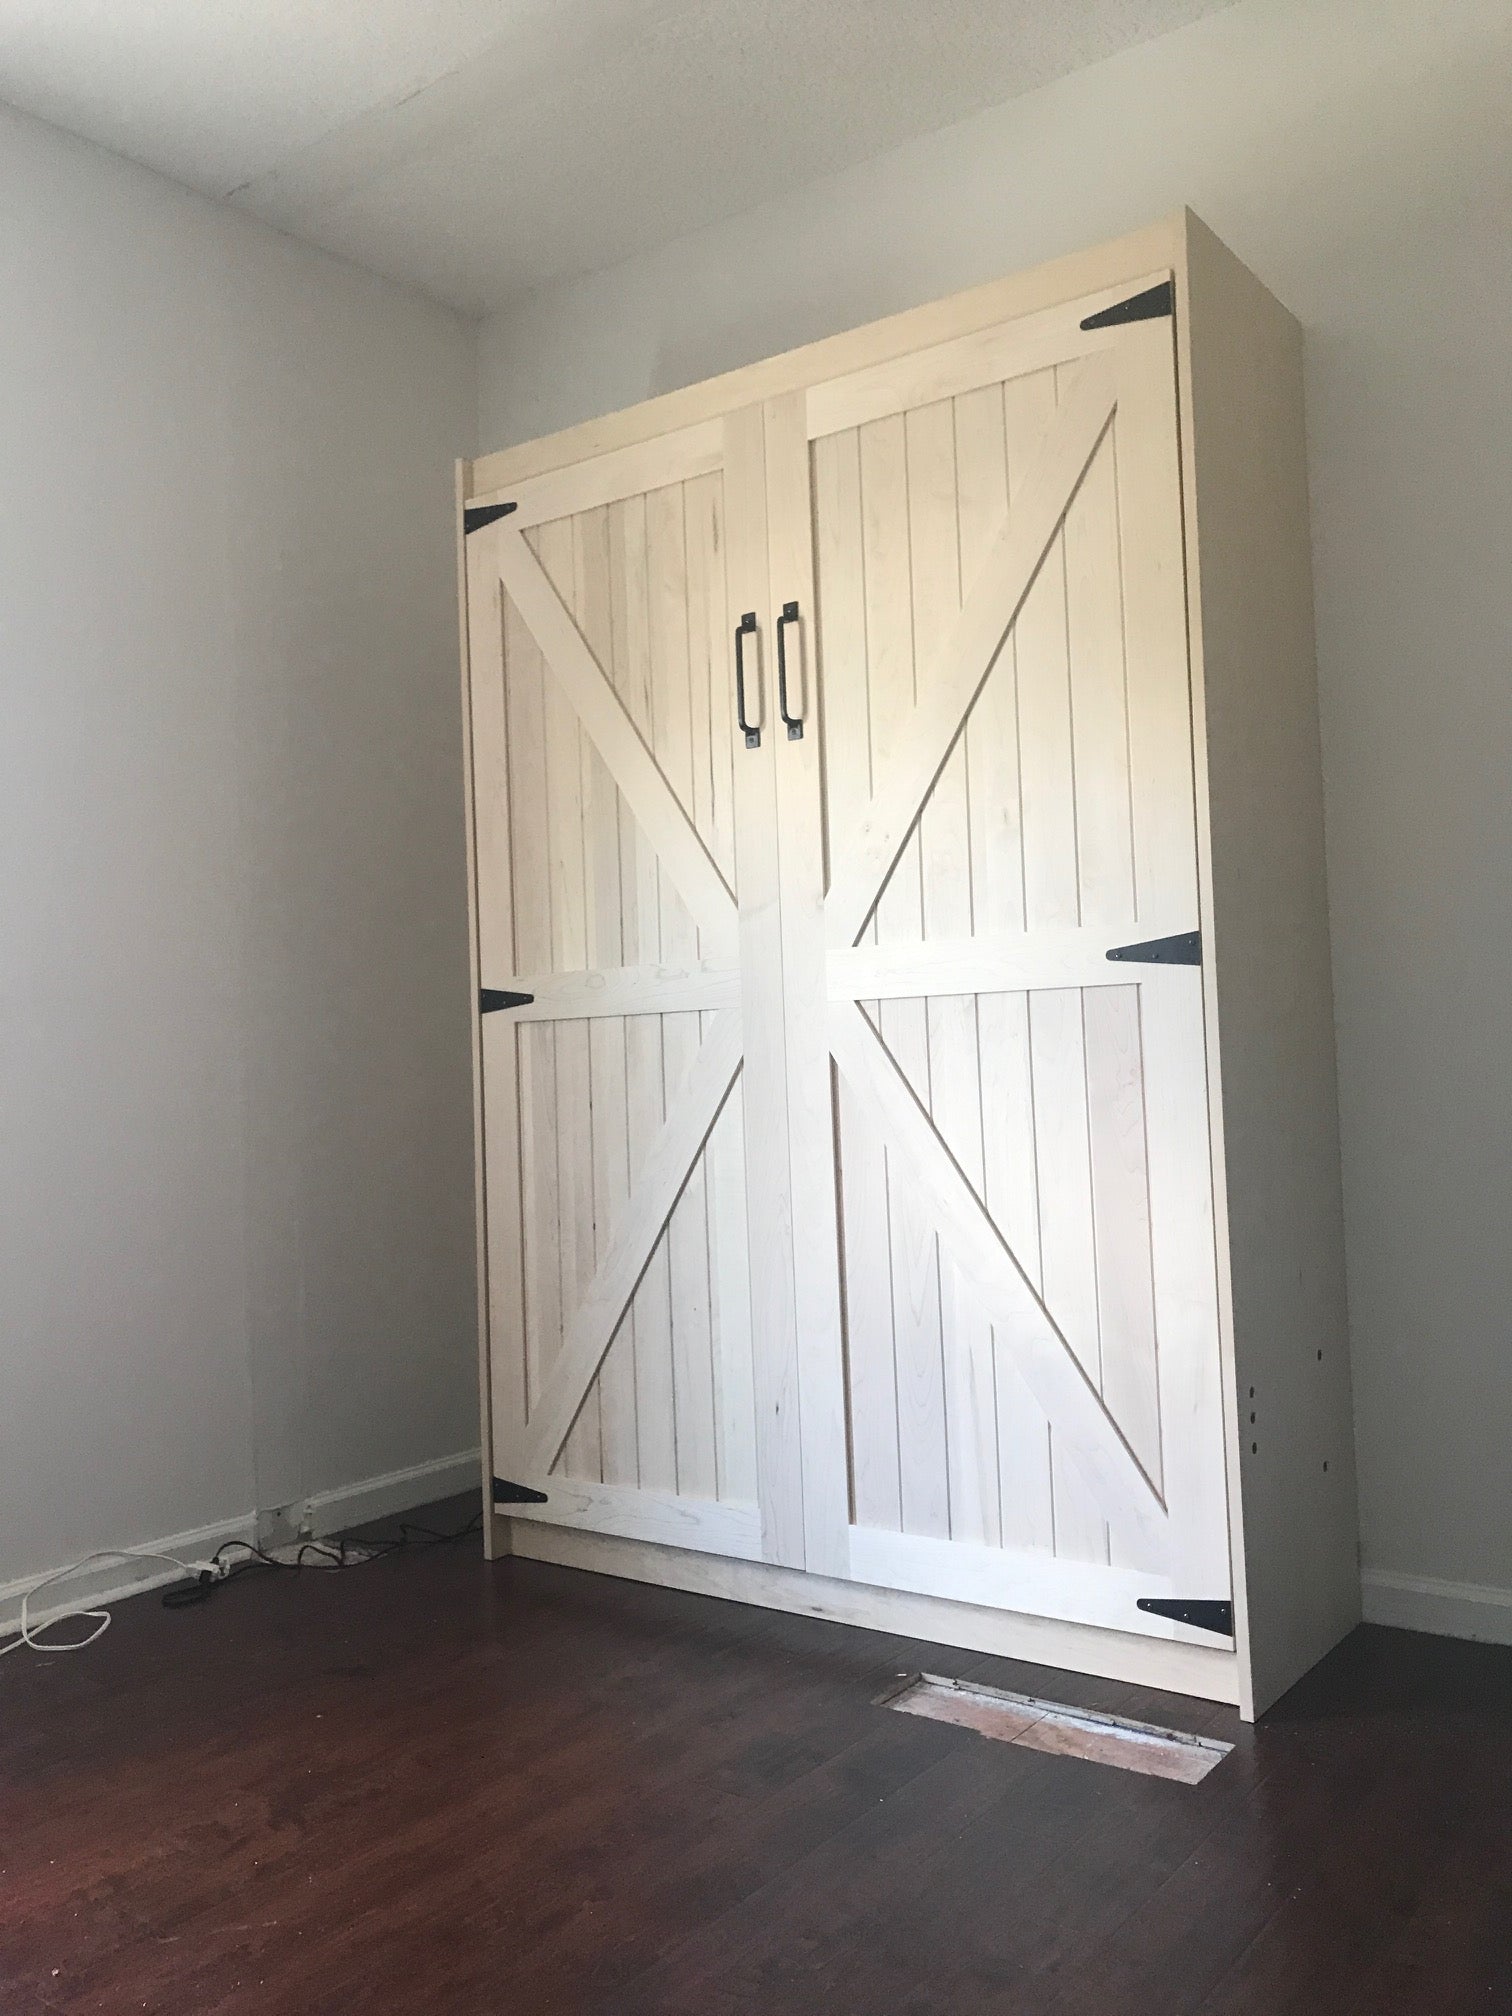 The Barn Door Panel Bed B in color white, left angled view